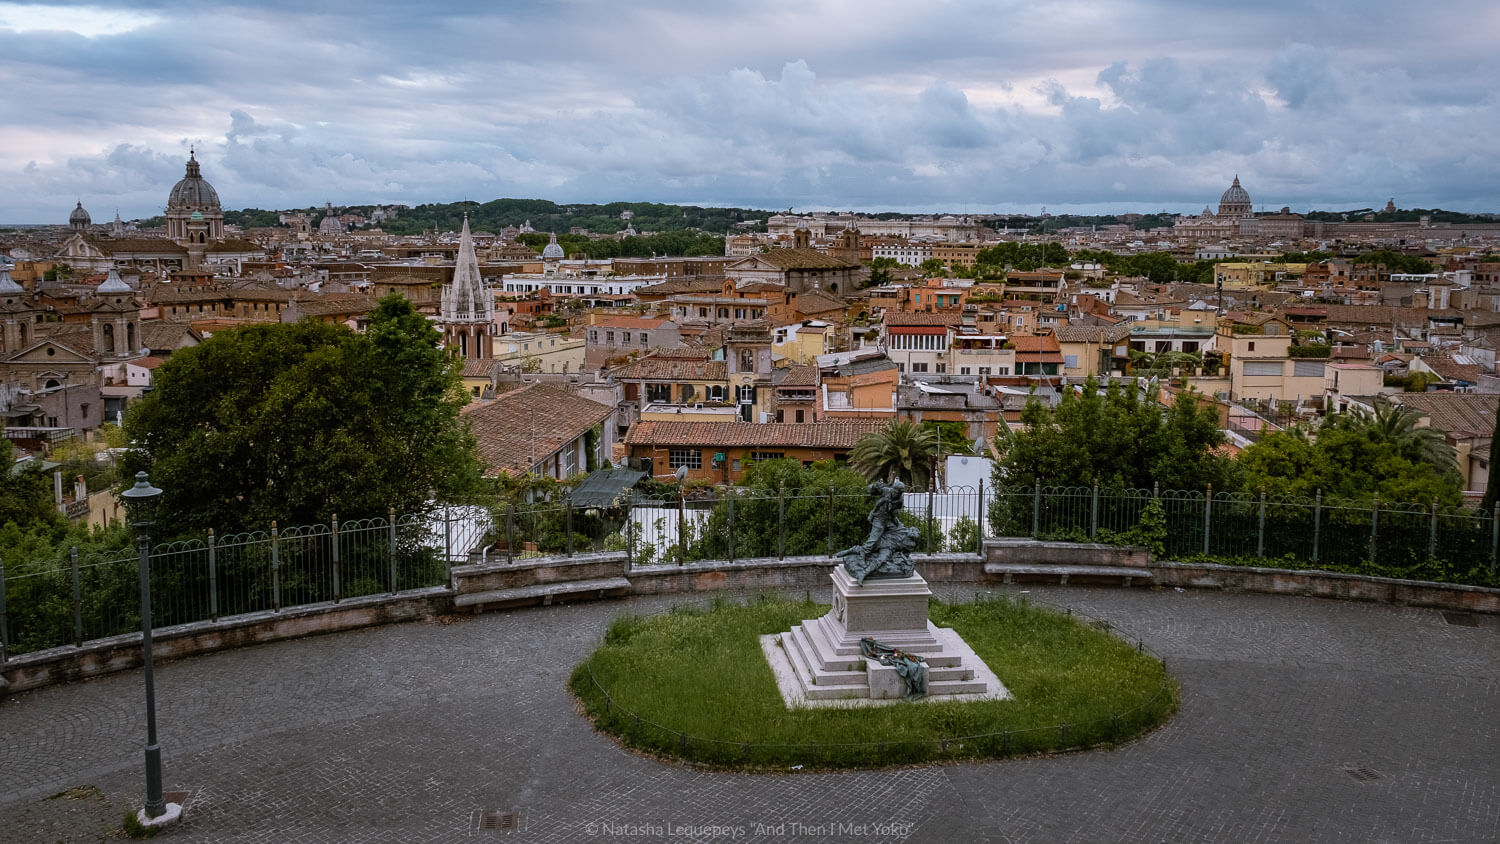 Views of Rome from Pincian Hill. Travel photography and guide by © Natasha Lequepeys for "And Then I Met Yoko". #rome #italy #travelblog #travelphotography